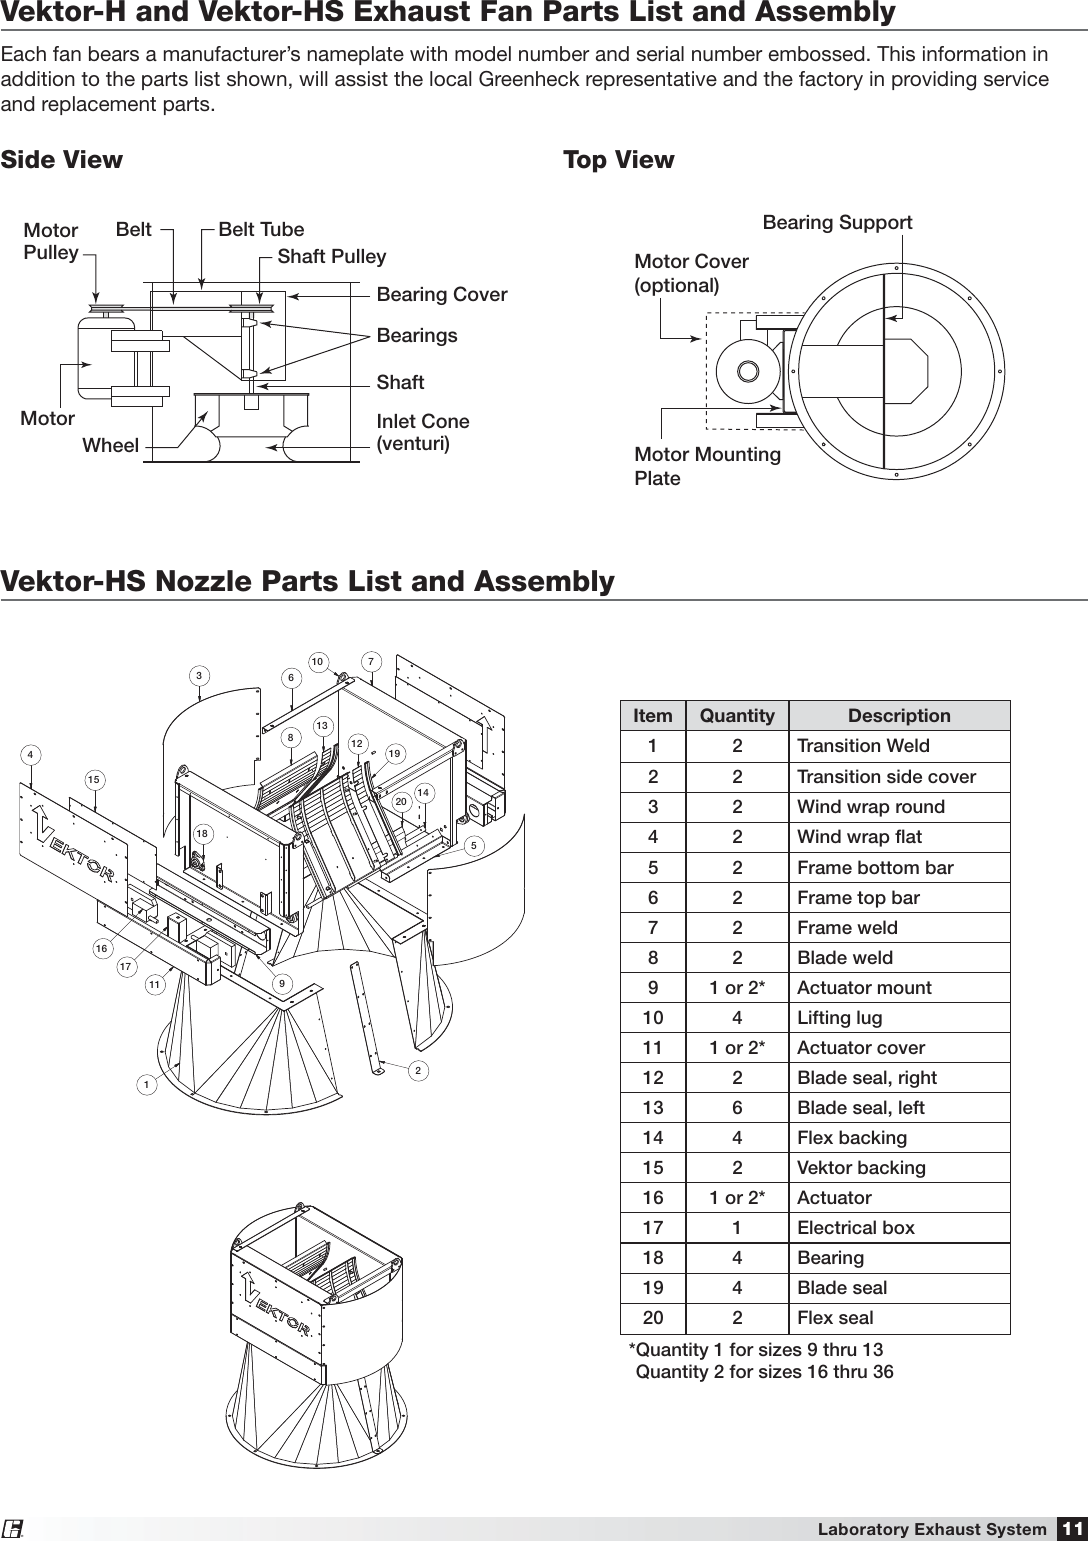 Page 11 of 12 - Greenheck-Fan Greenheck-Fan-Laboratory-Exhaust-System-Vektor-H-Users-Manual-  Greenheck-fan-laboratory-exhaust-system-vektor-h-users-manual